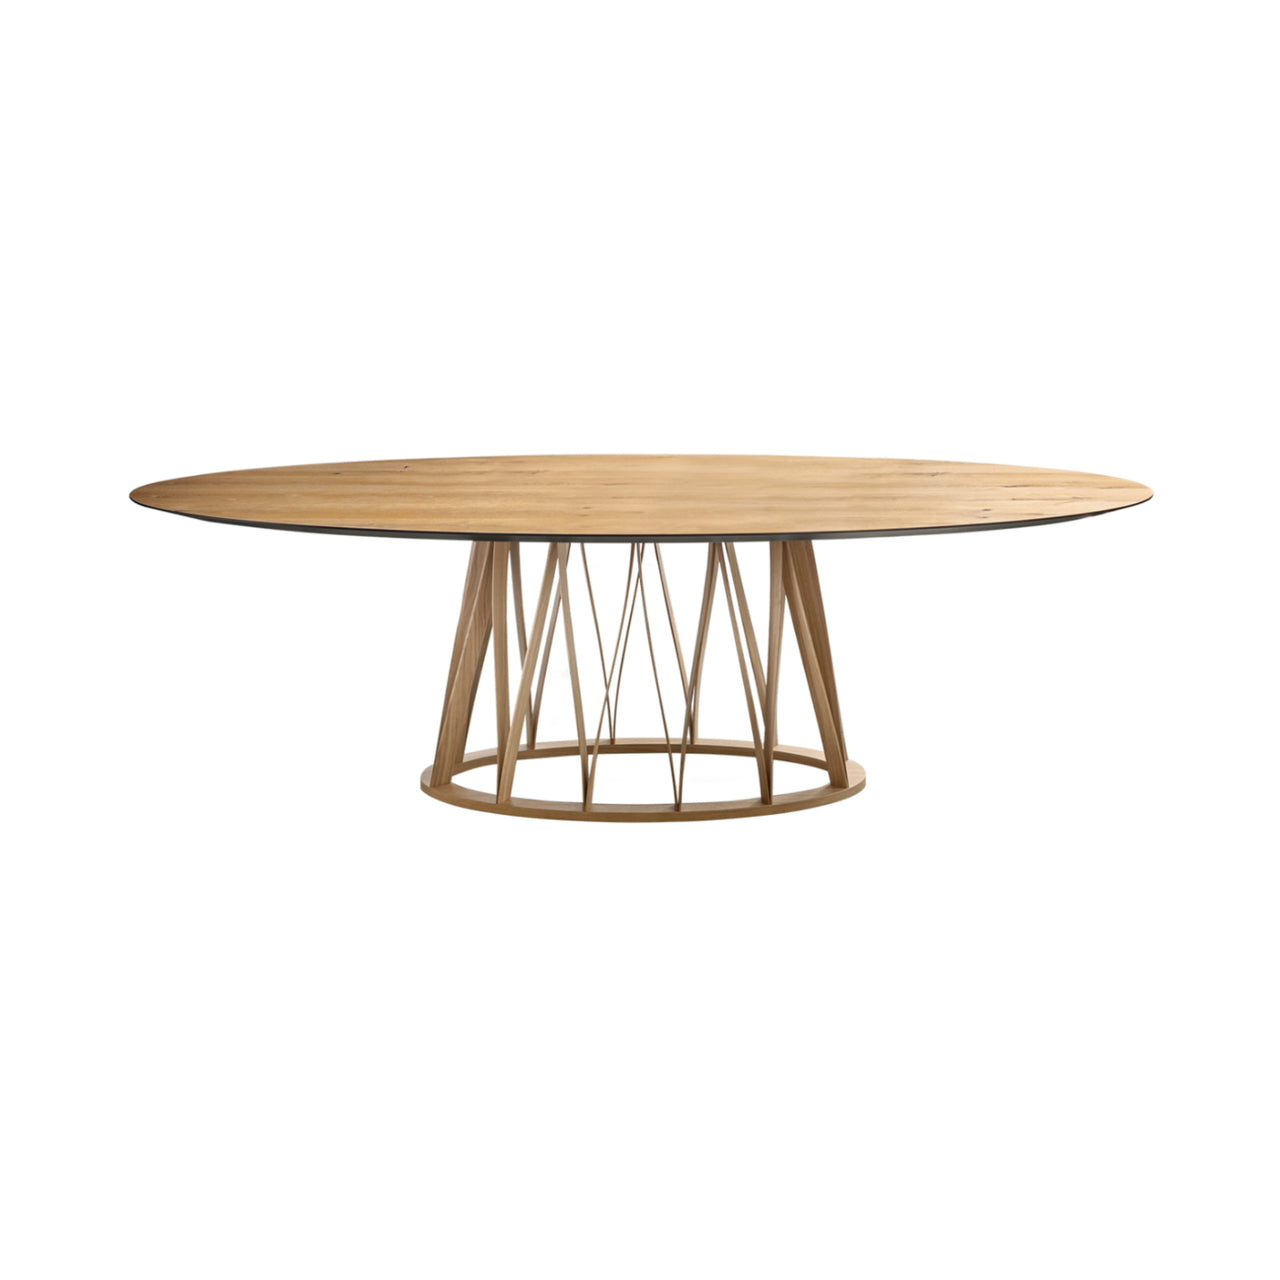 Acco Oval Dining Table: Small + Flamed Oak + Ash